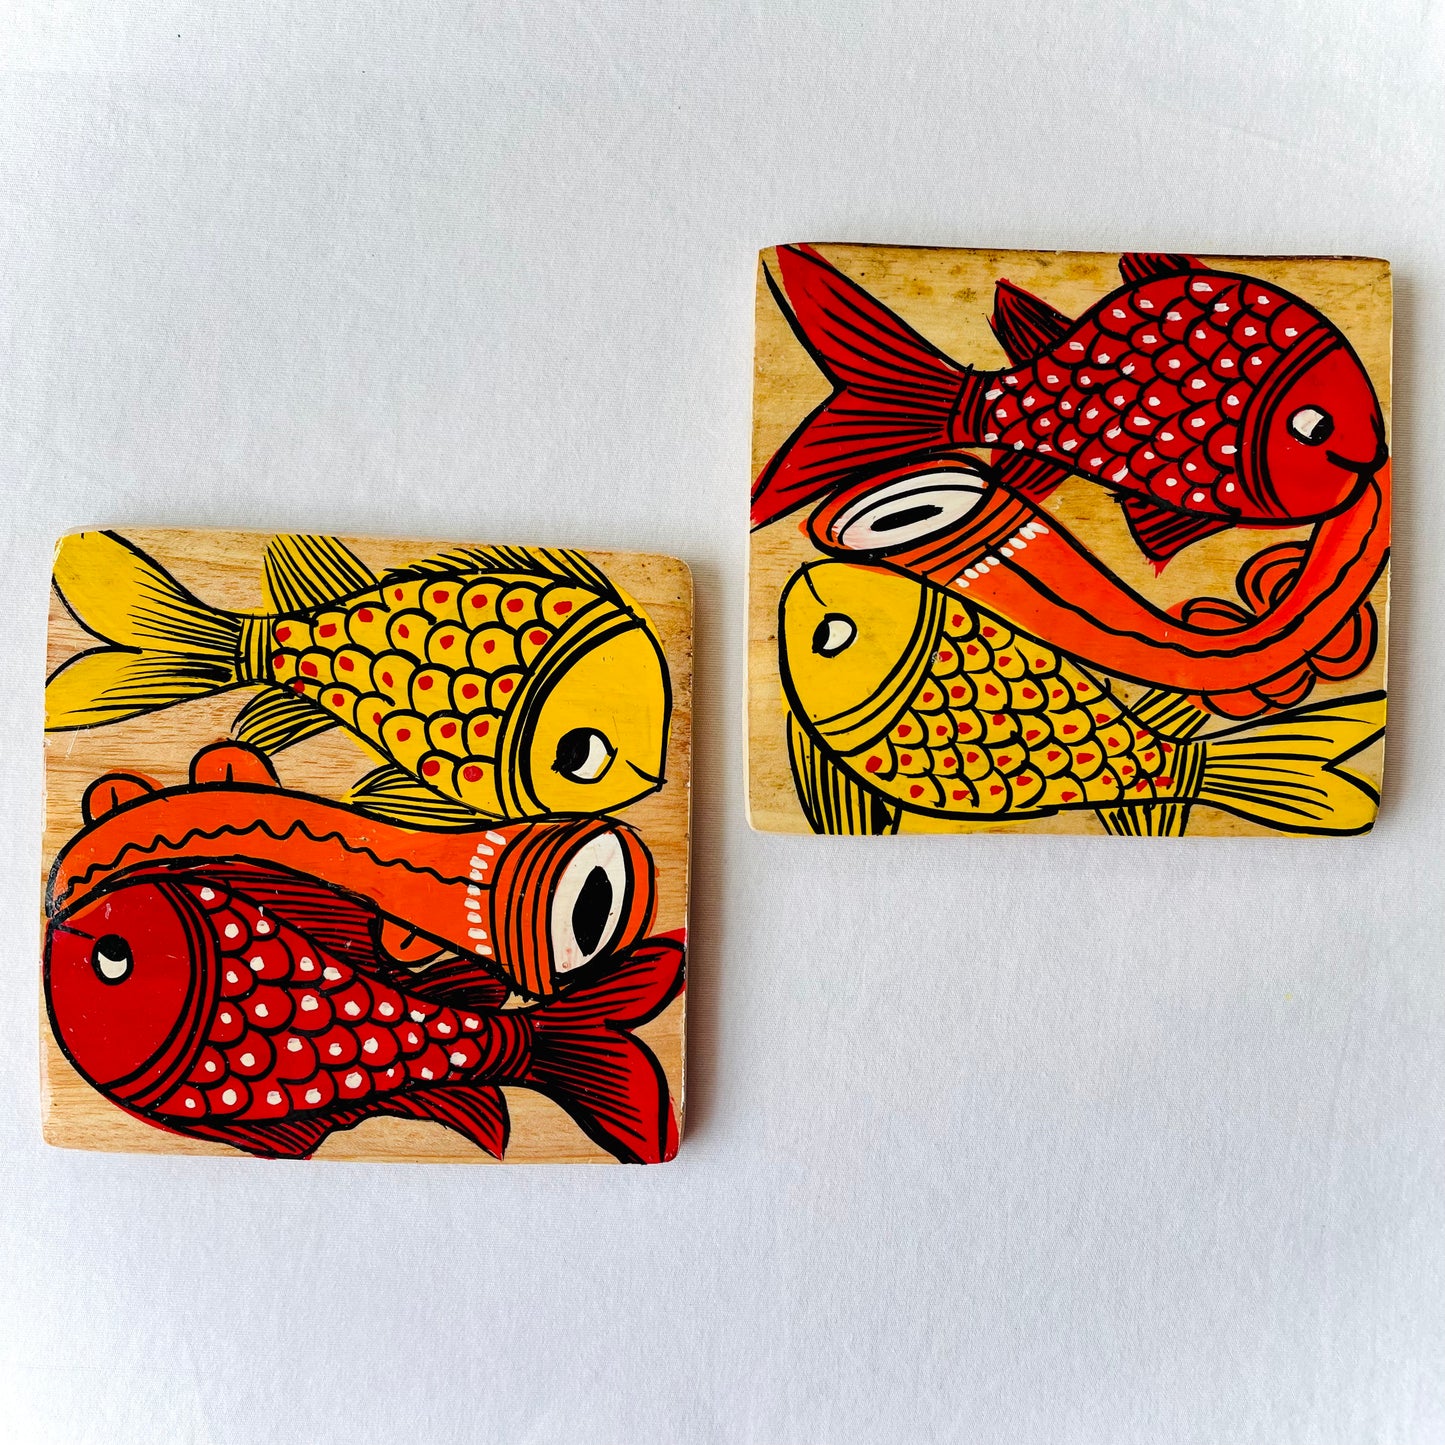 Two square wood coasters displayed against a white background, feature one yellow fish and one redfish along with an Indian classical musical instrument in each wood coaster